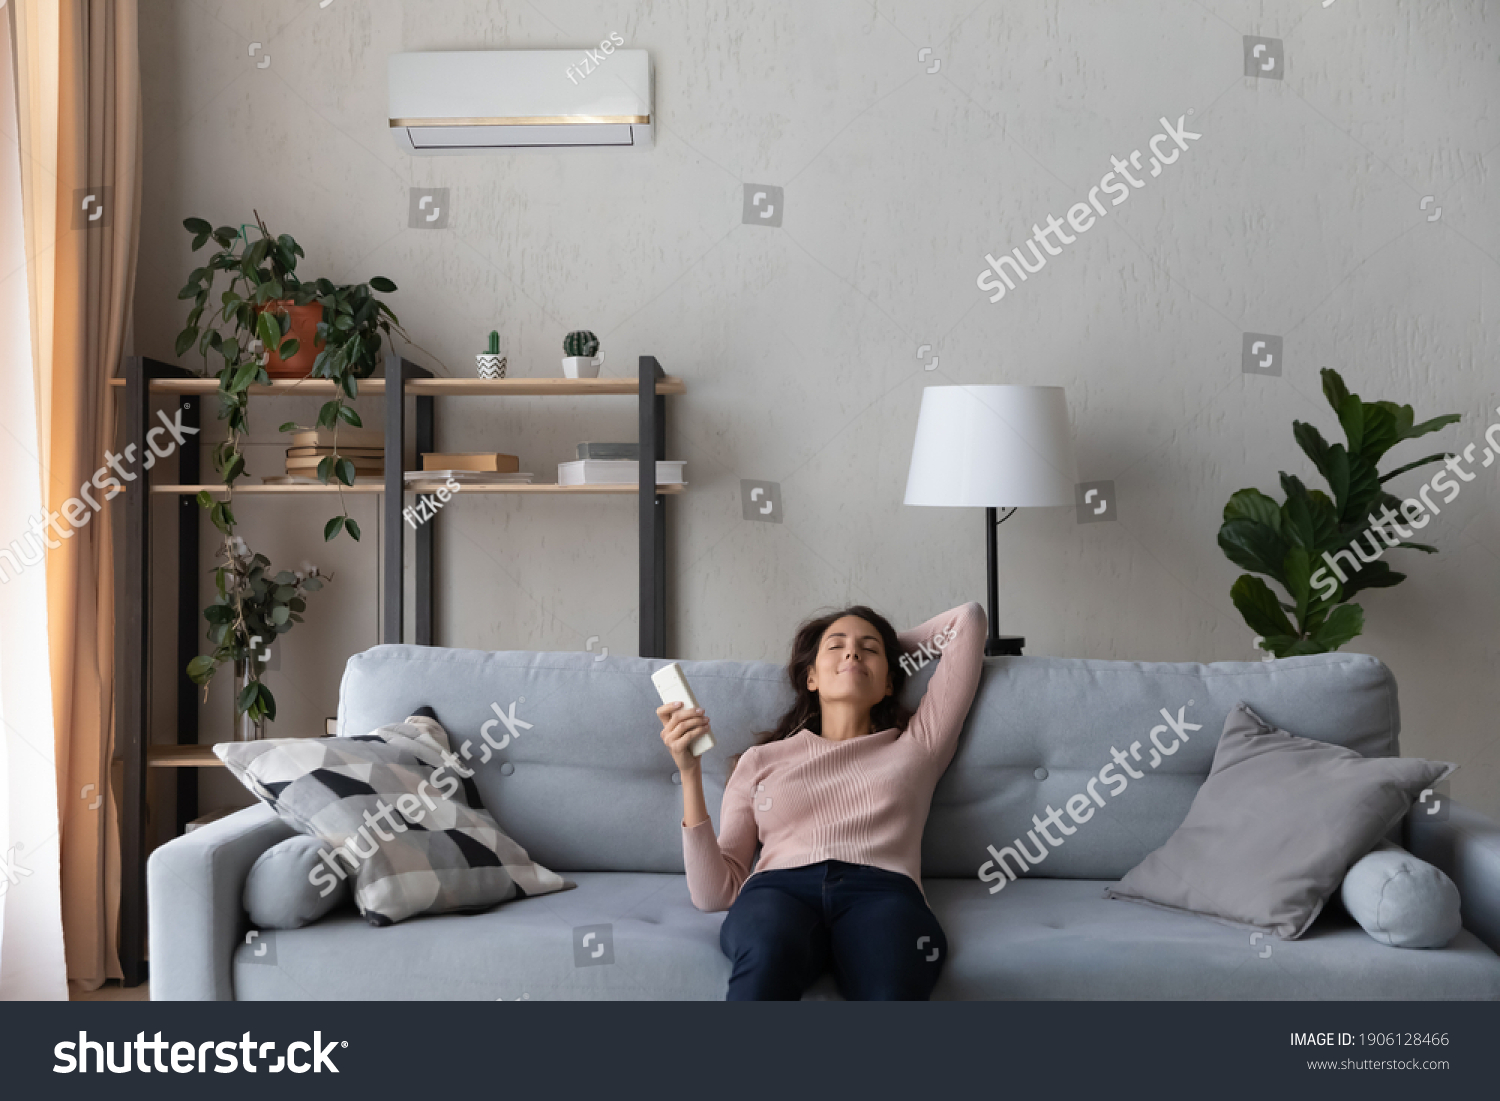 Happy young caucasian woman turning on air conditioner with controller, breathing fresh cooled air or enjoying comfortable temperature indoors, relaxing on comfortable sofa in modern living room. #1906128466